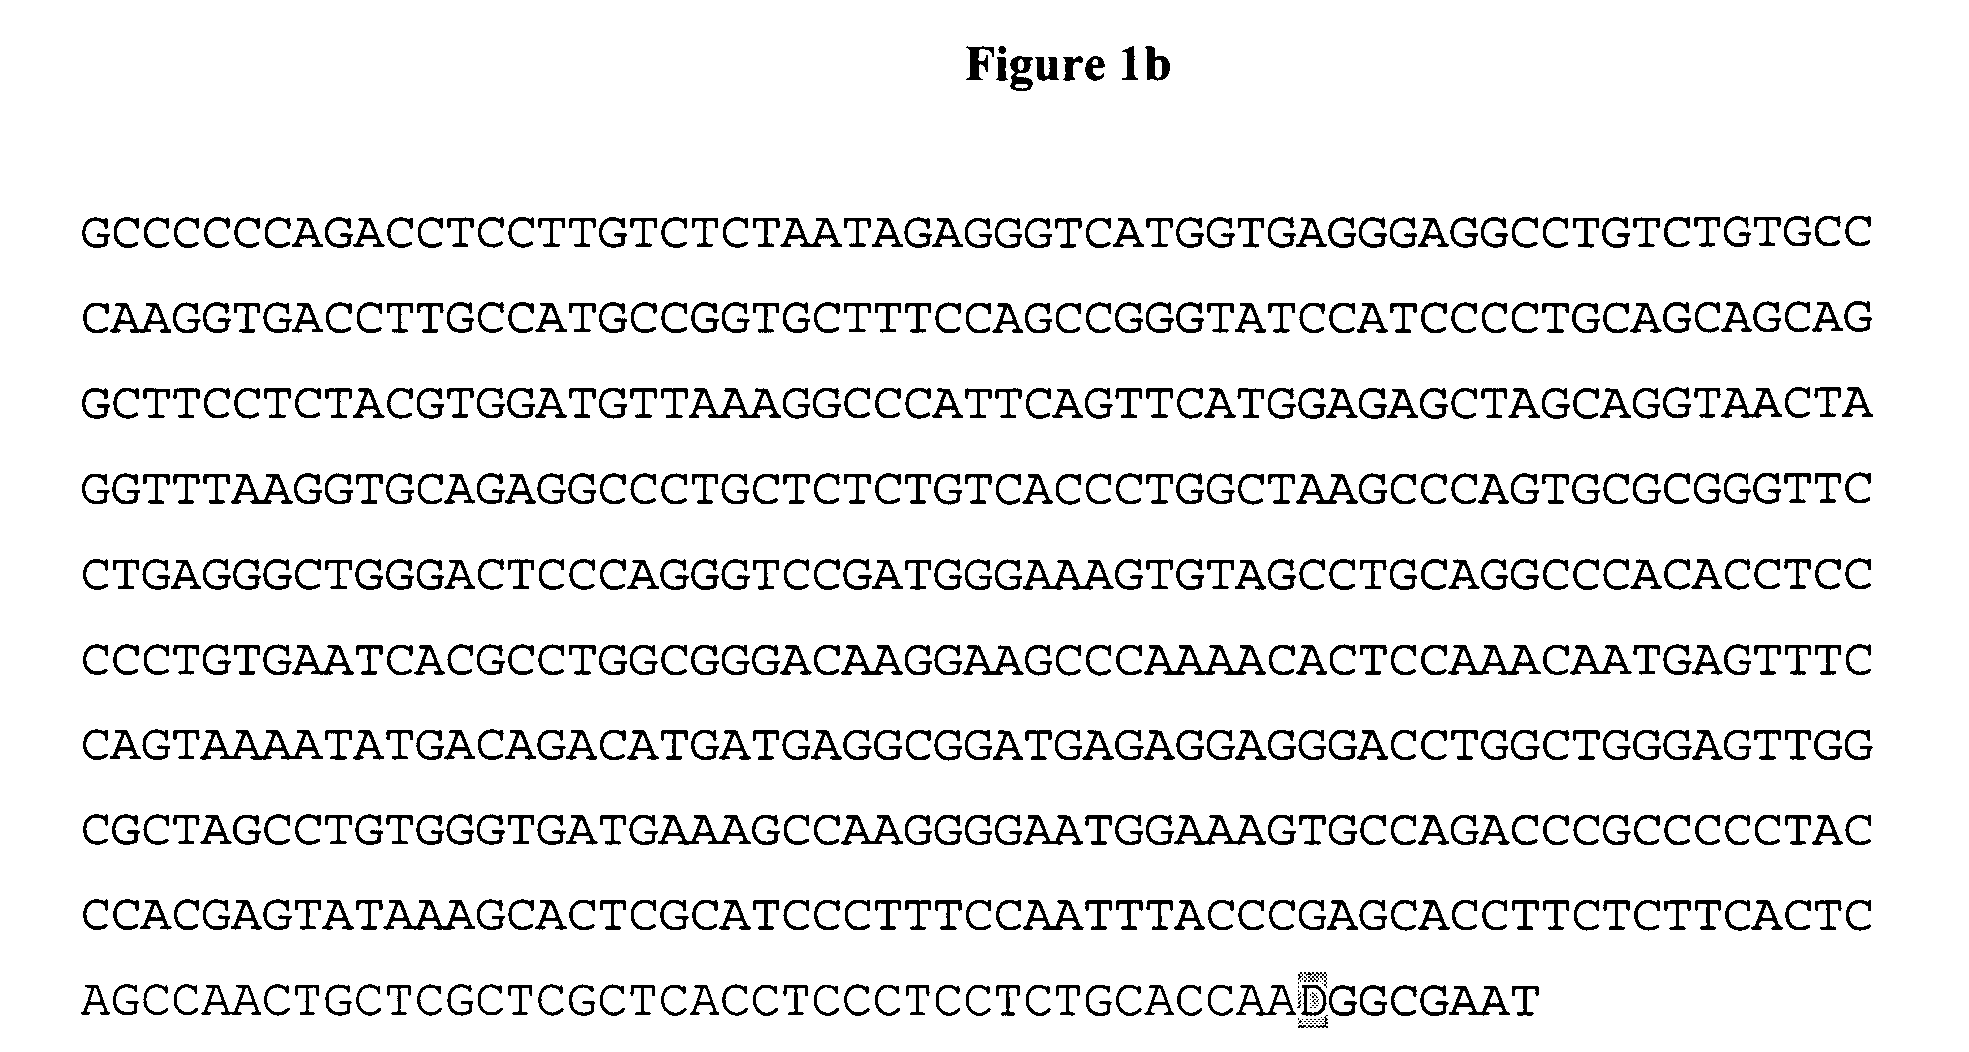 Human skin equivalents expressing exogenous polypeptides